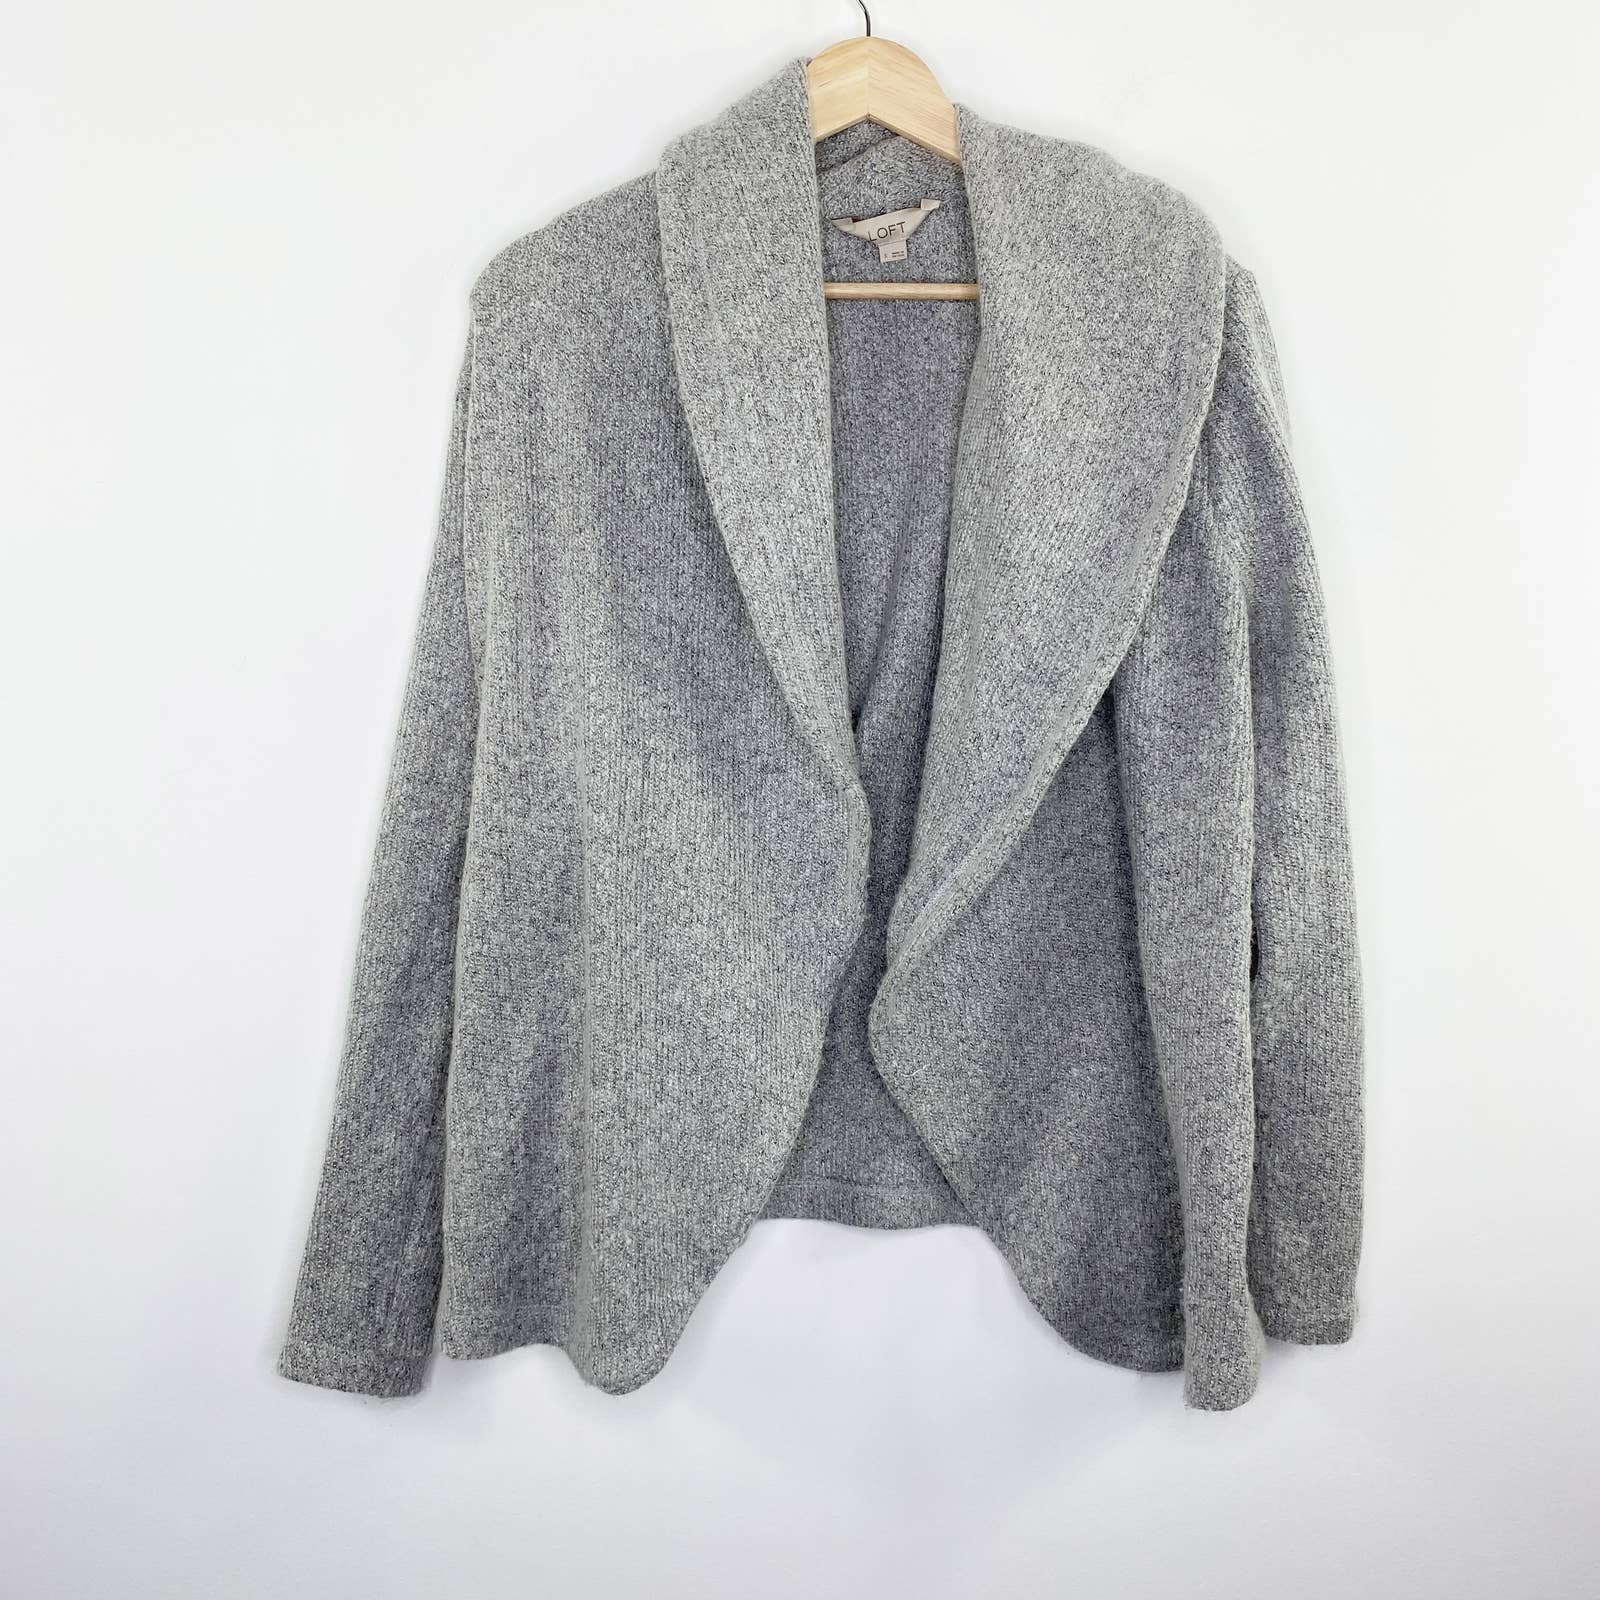 High quality Loft Gray Open Front Knit Cardigan Sweater